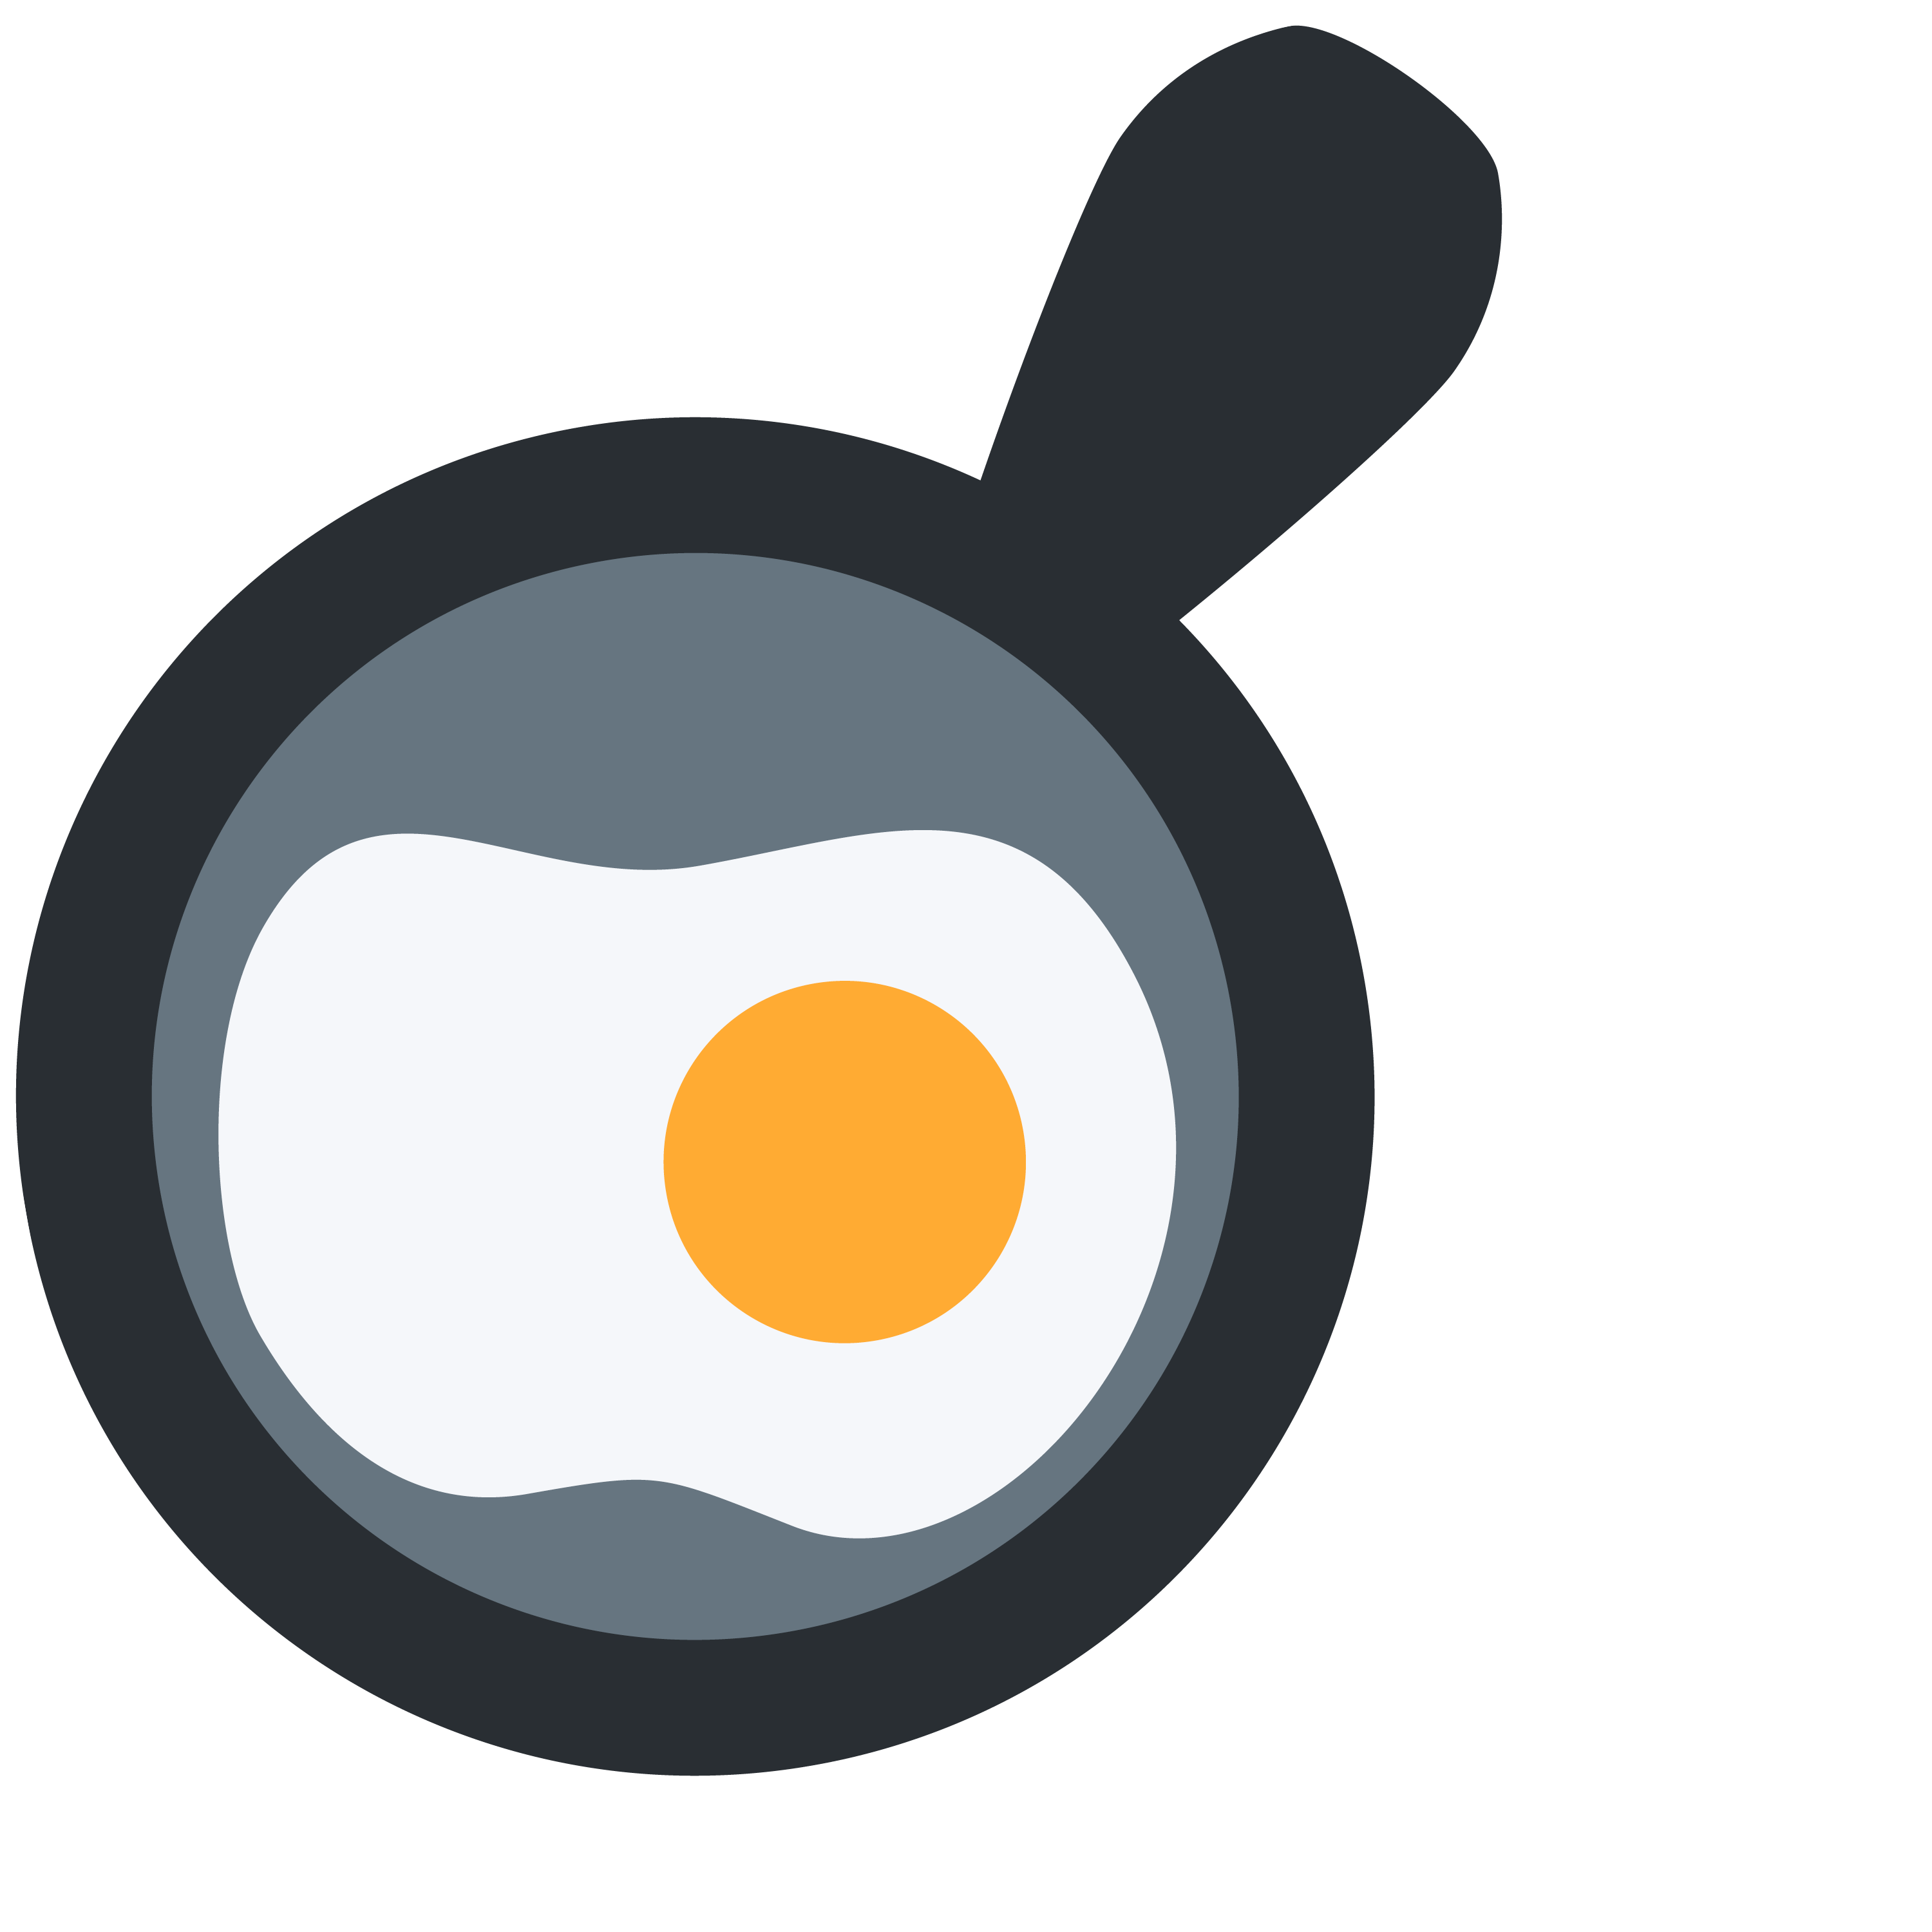 Frying Pan Breakfast Sticker by #Foodloversunite for iOS & Android | GIPHY